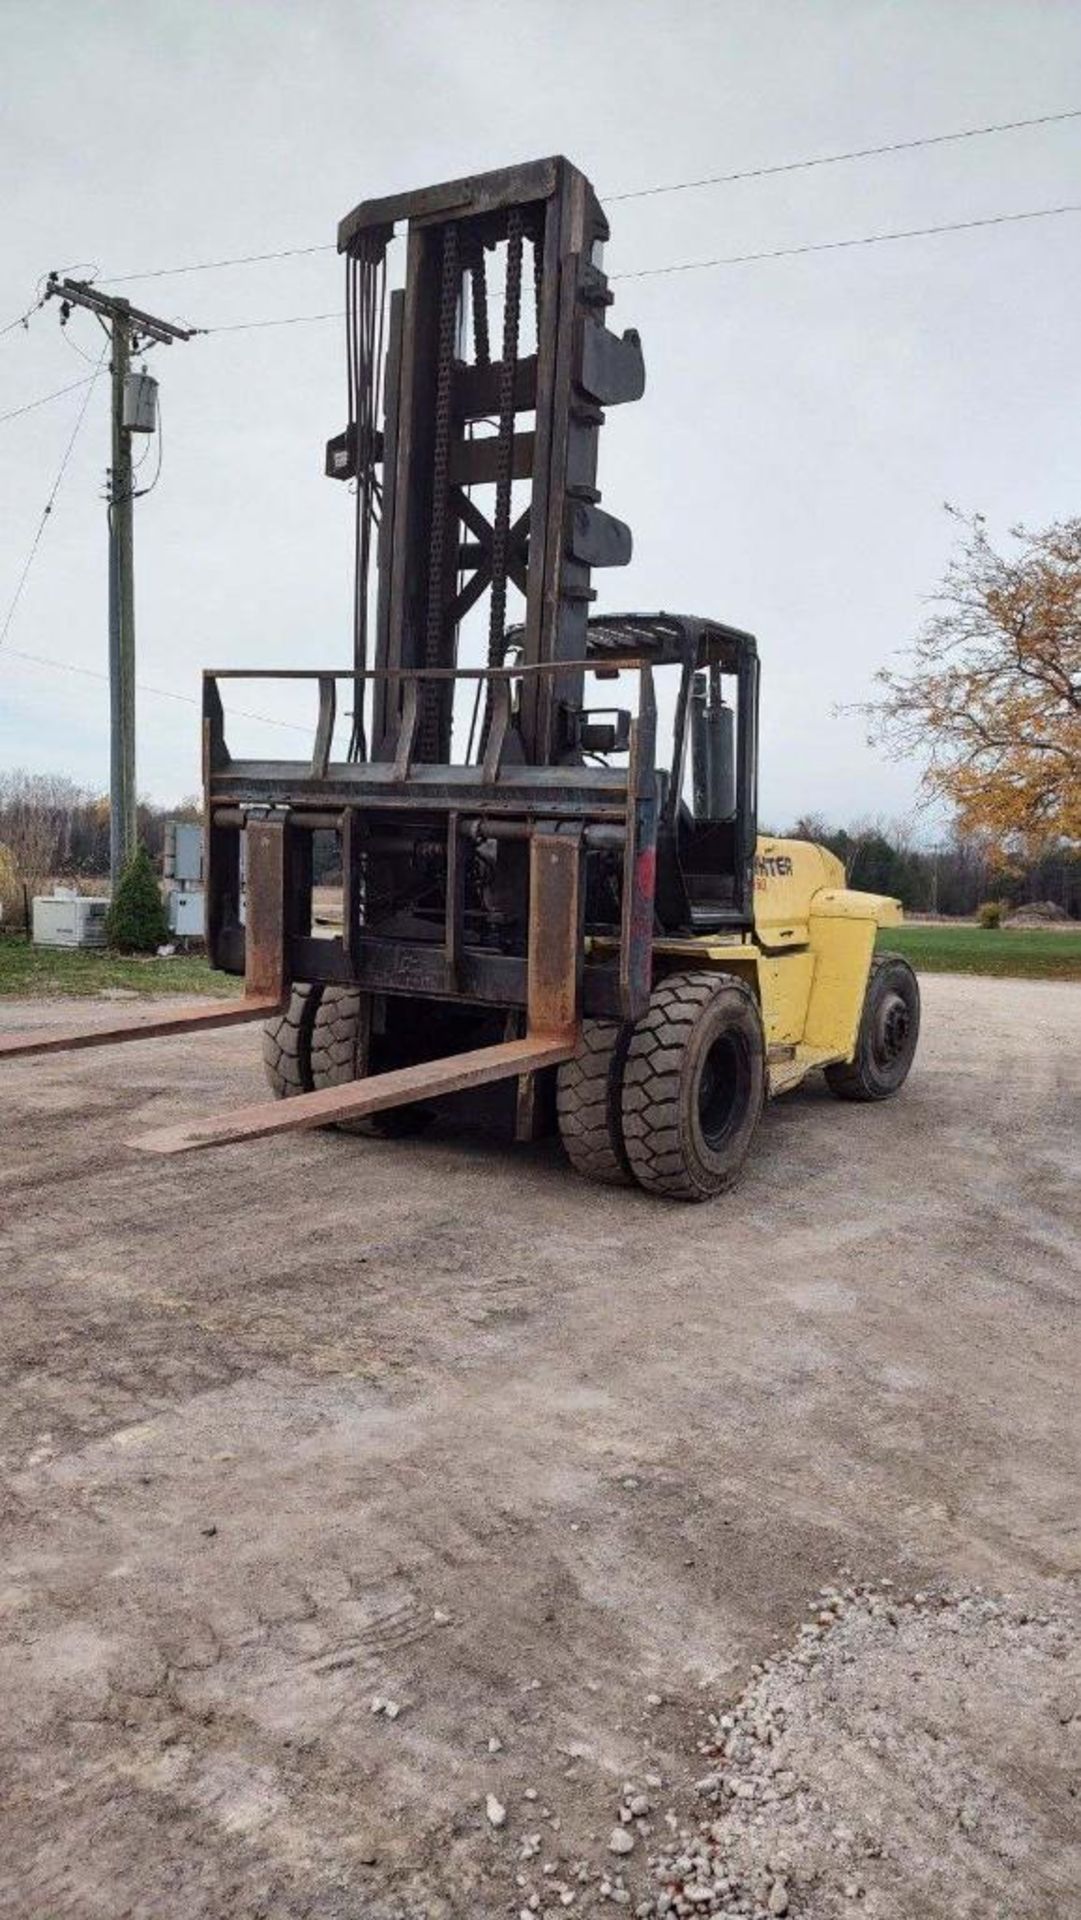 2005 Hyster 36,000 LB. Capacity Forklift, Model: H360HD, S/N: F019E01917C, Dual Drive Pneumatic Tire - Image 3 of 5